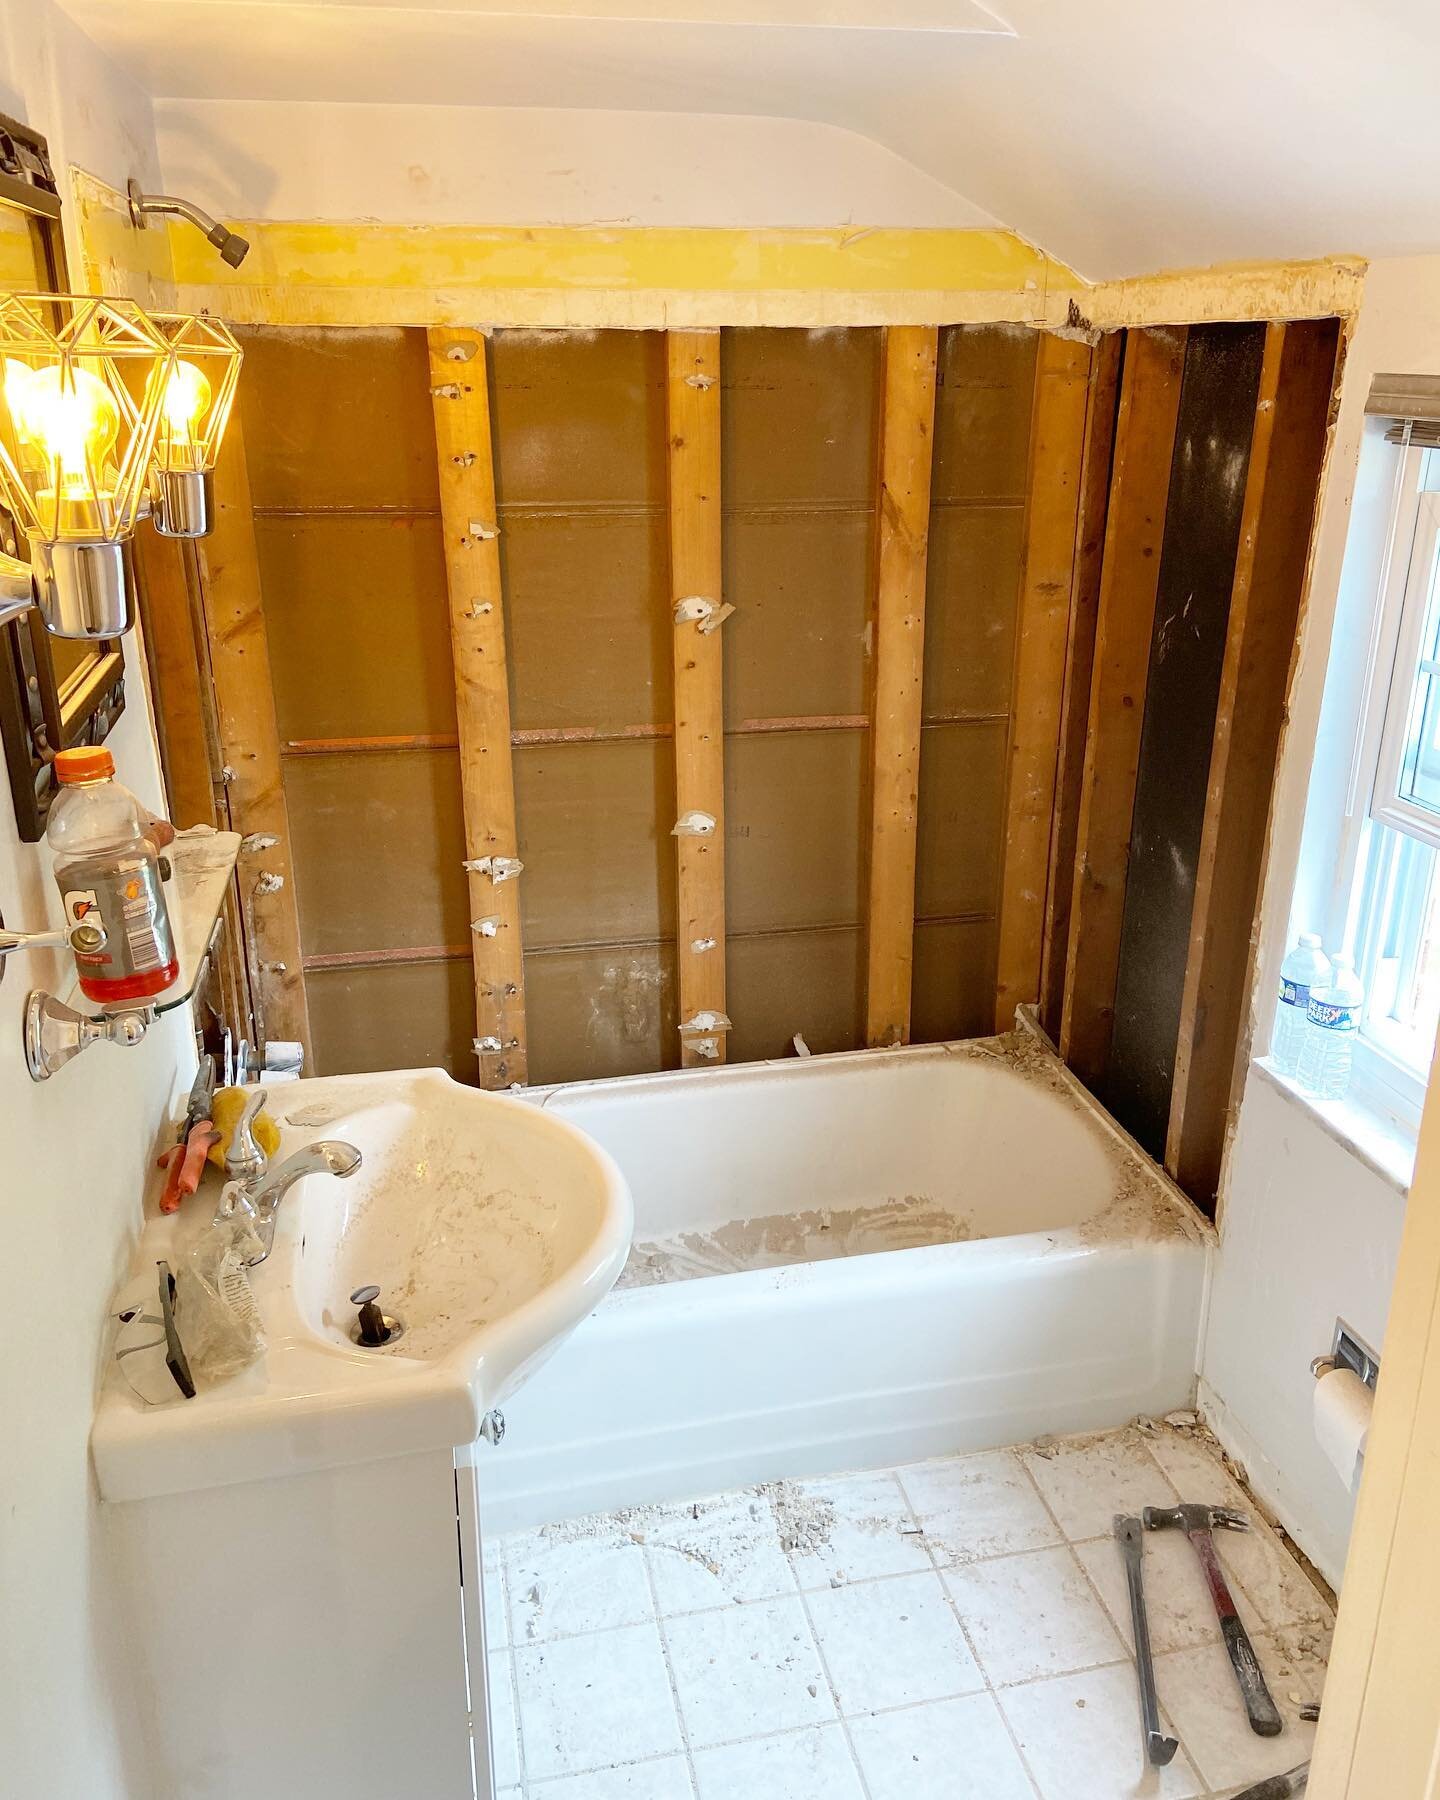 Demo Day 🔨 

We have been waiting a few months for all things to align for this bathroom remodel. Today&rsquo;s the day.

This room will receive a drastic makeover with beautiful contrasts between blacks, whites, and brown.

Good news! We just recei